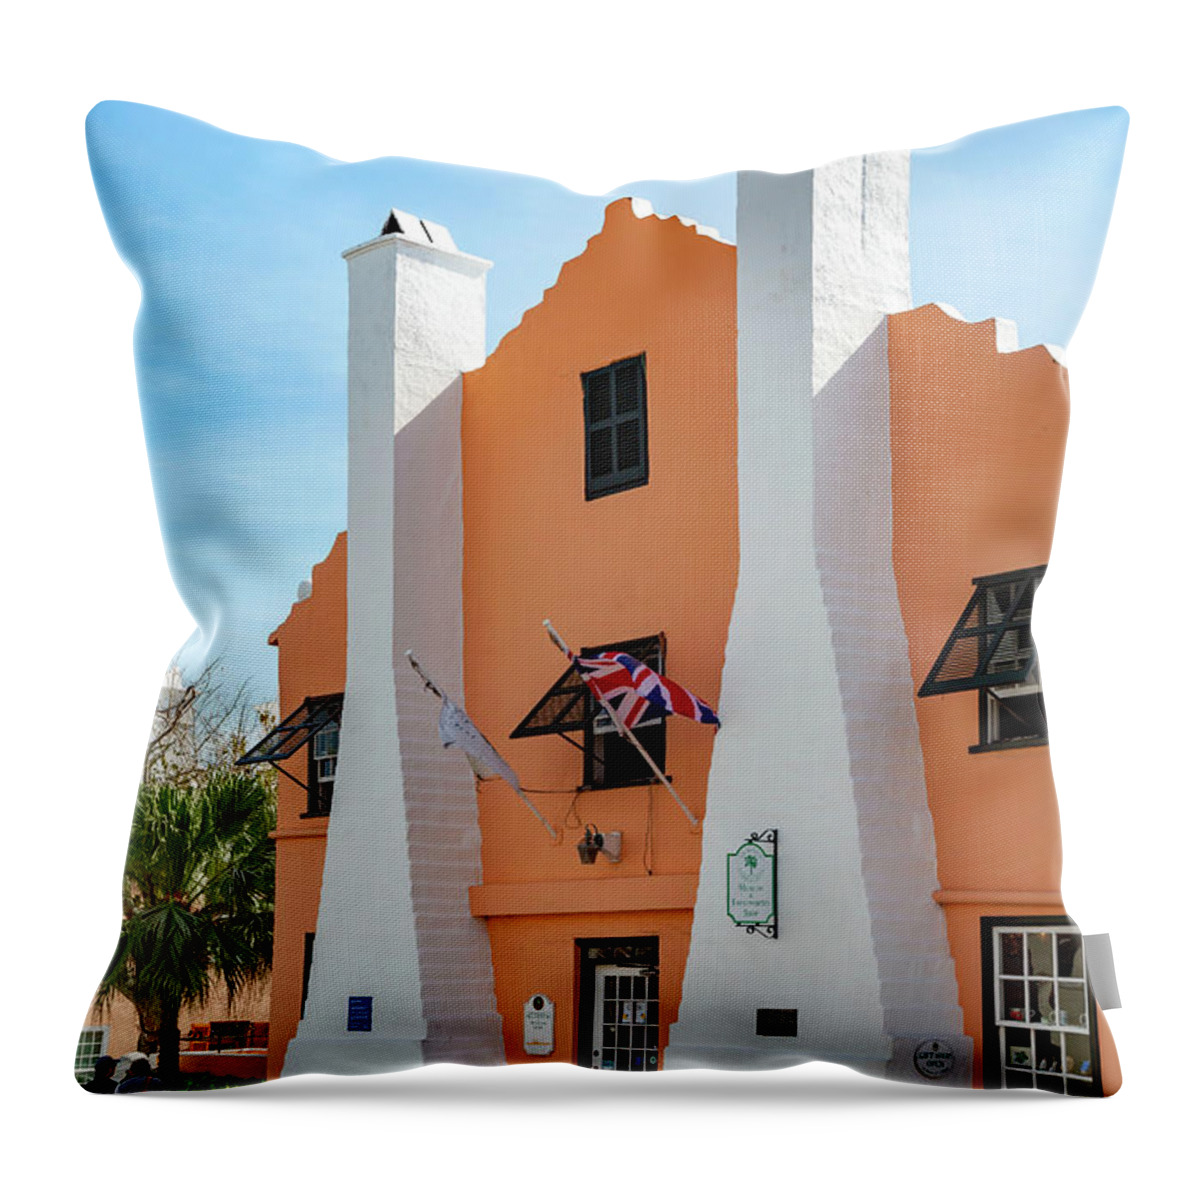 Estock Throw Pillow featuring the digital art Museum, St George, Bermuda #2 by Lumiere